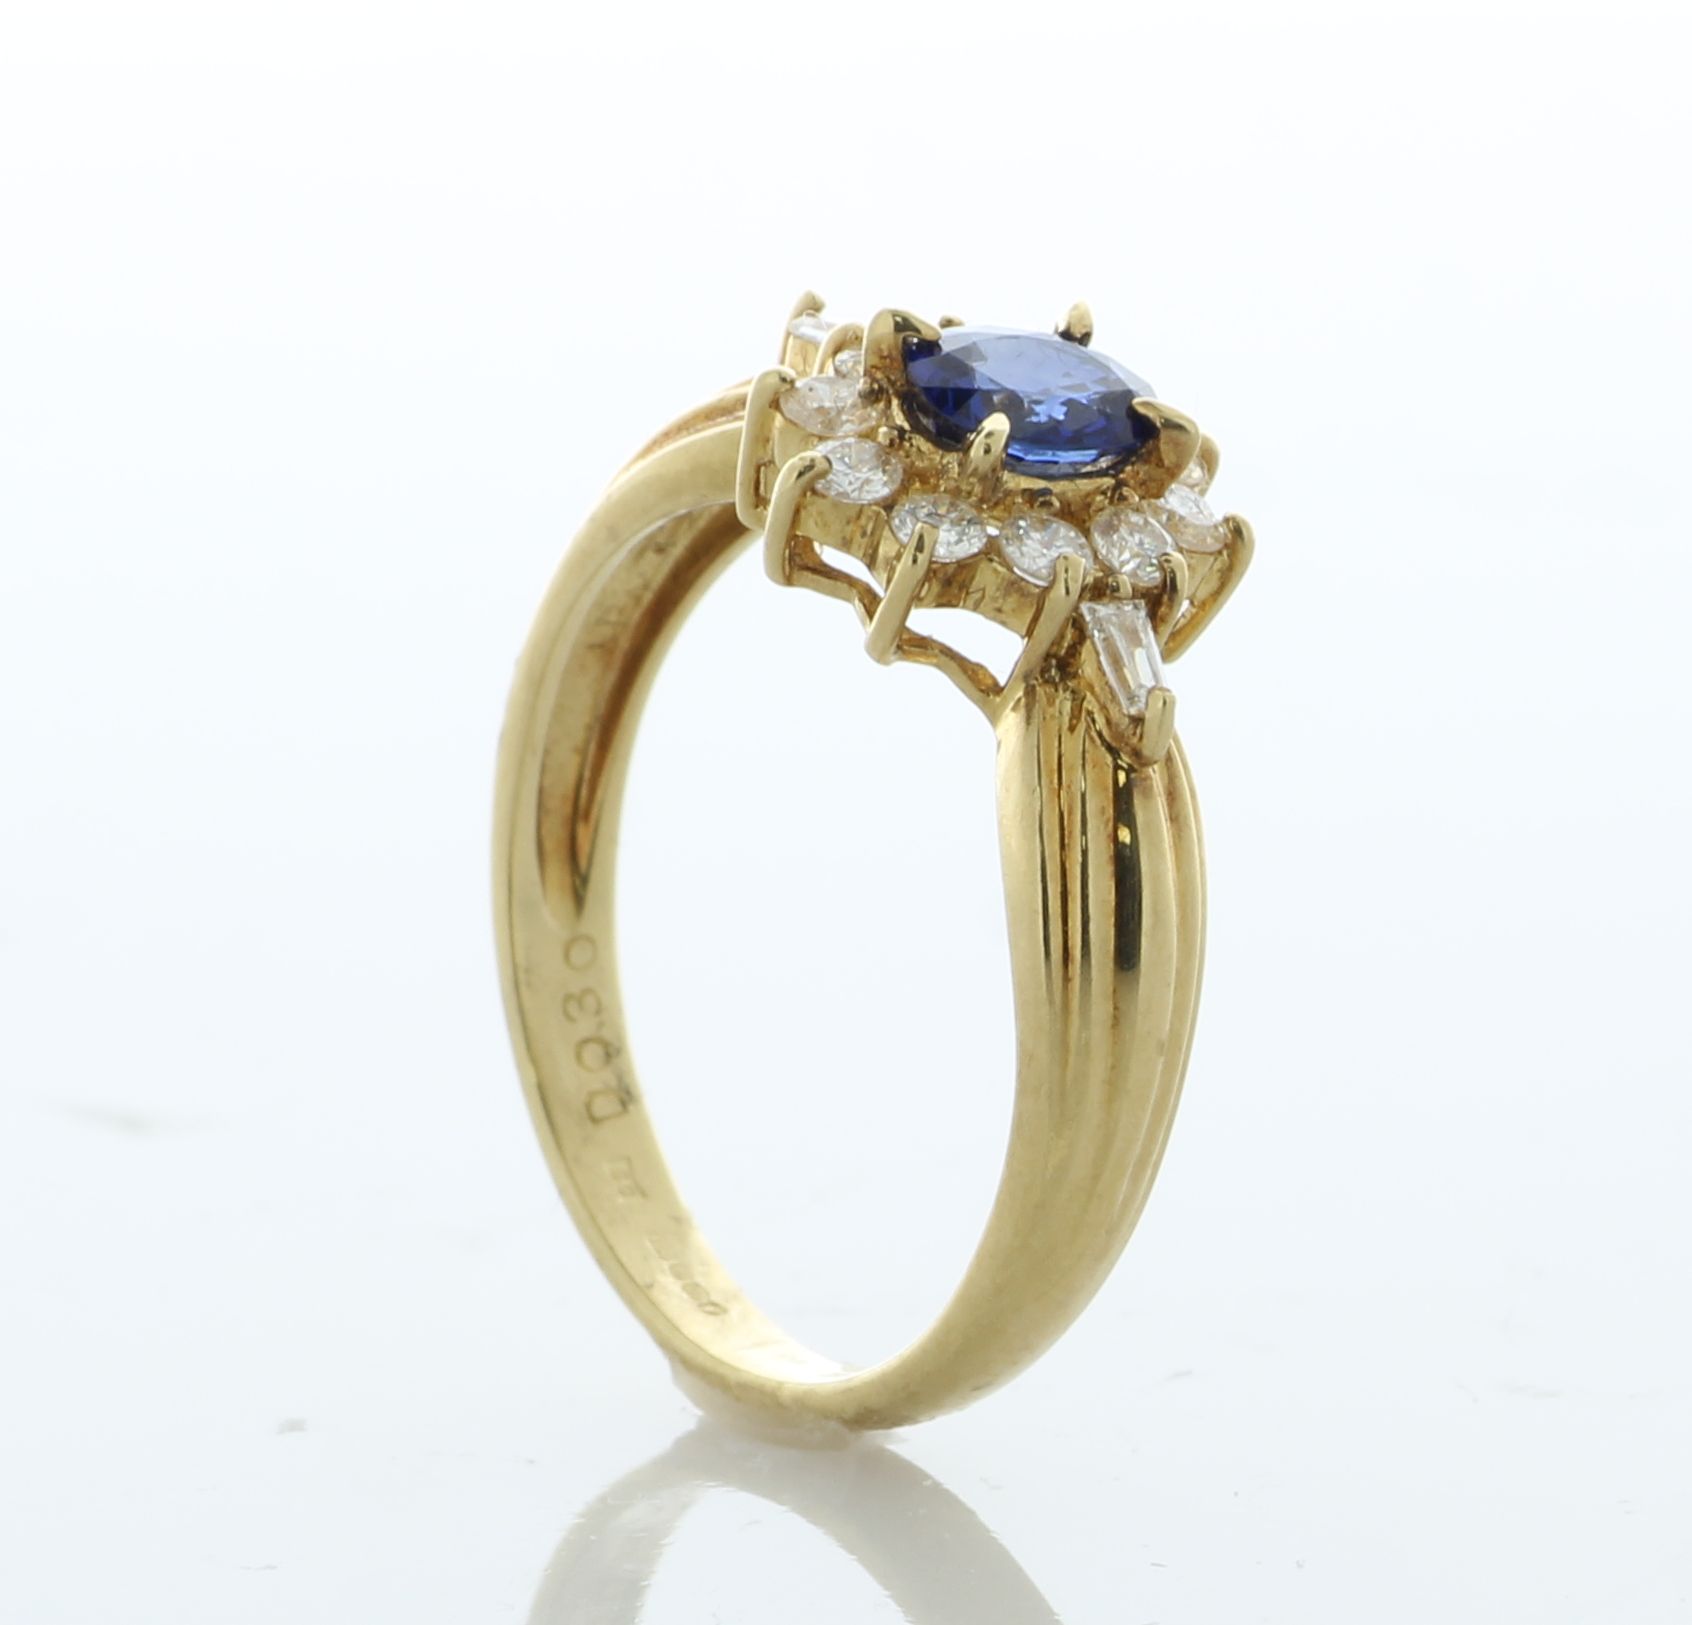 18ct Yellow Gold Oval Cut Sapphire and Diamond Ring (S0.45) 0.30 Carats - Image 2 of 5